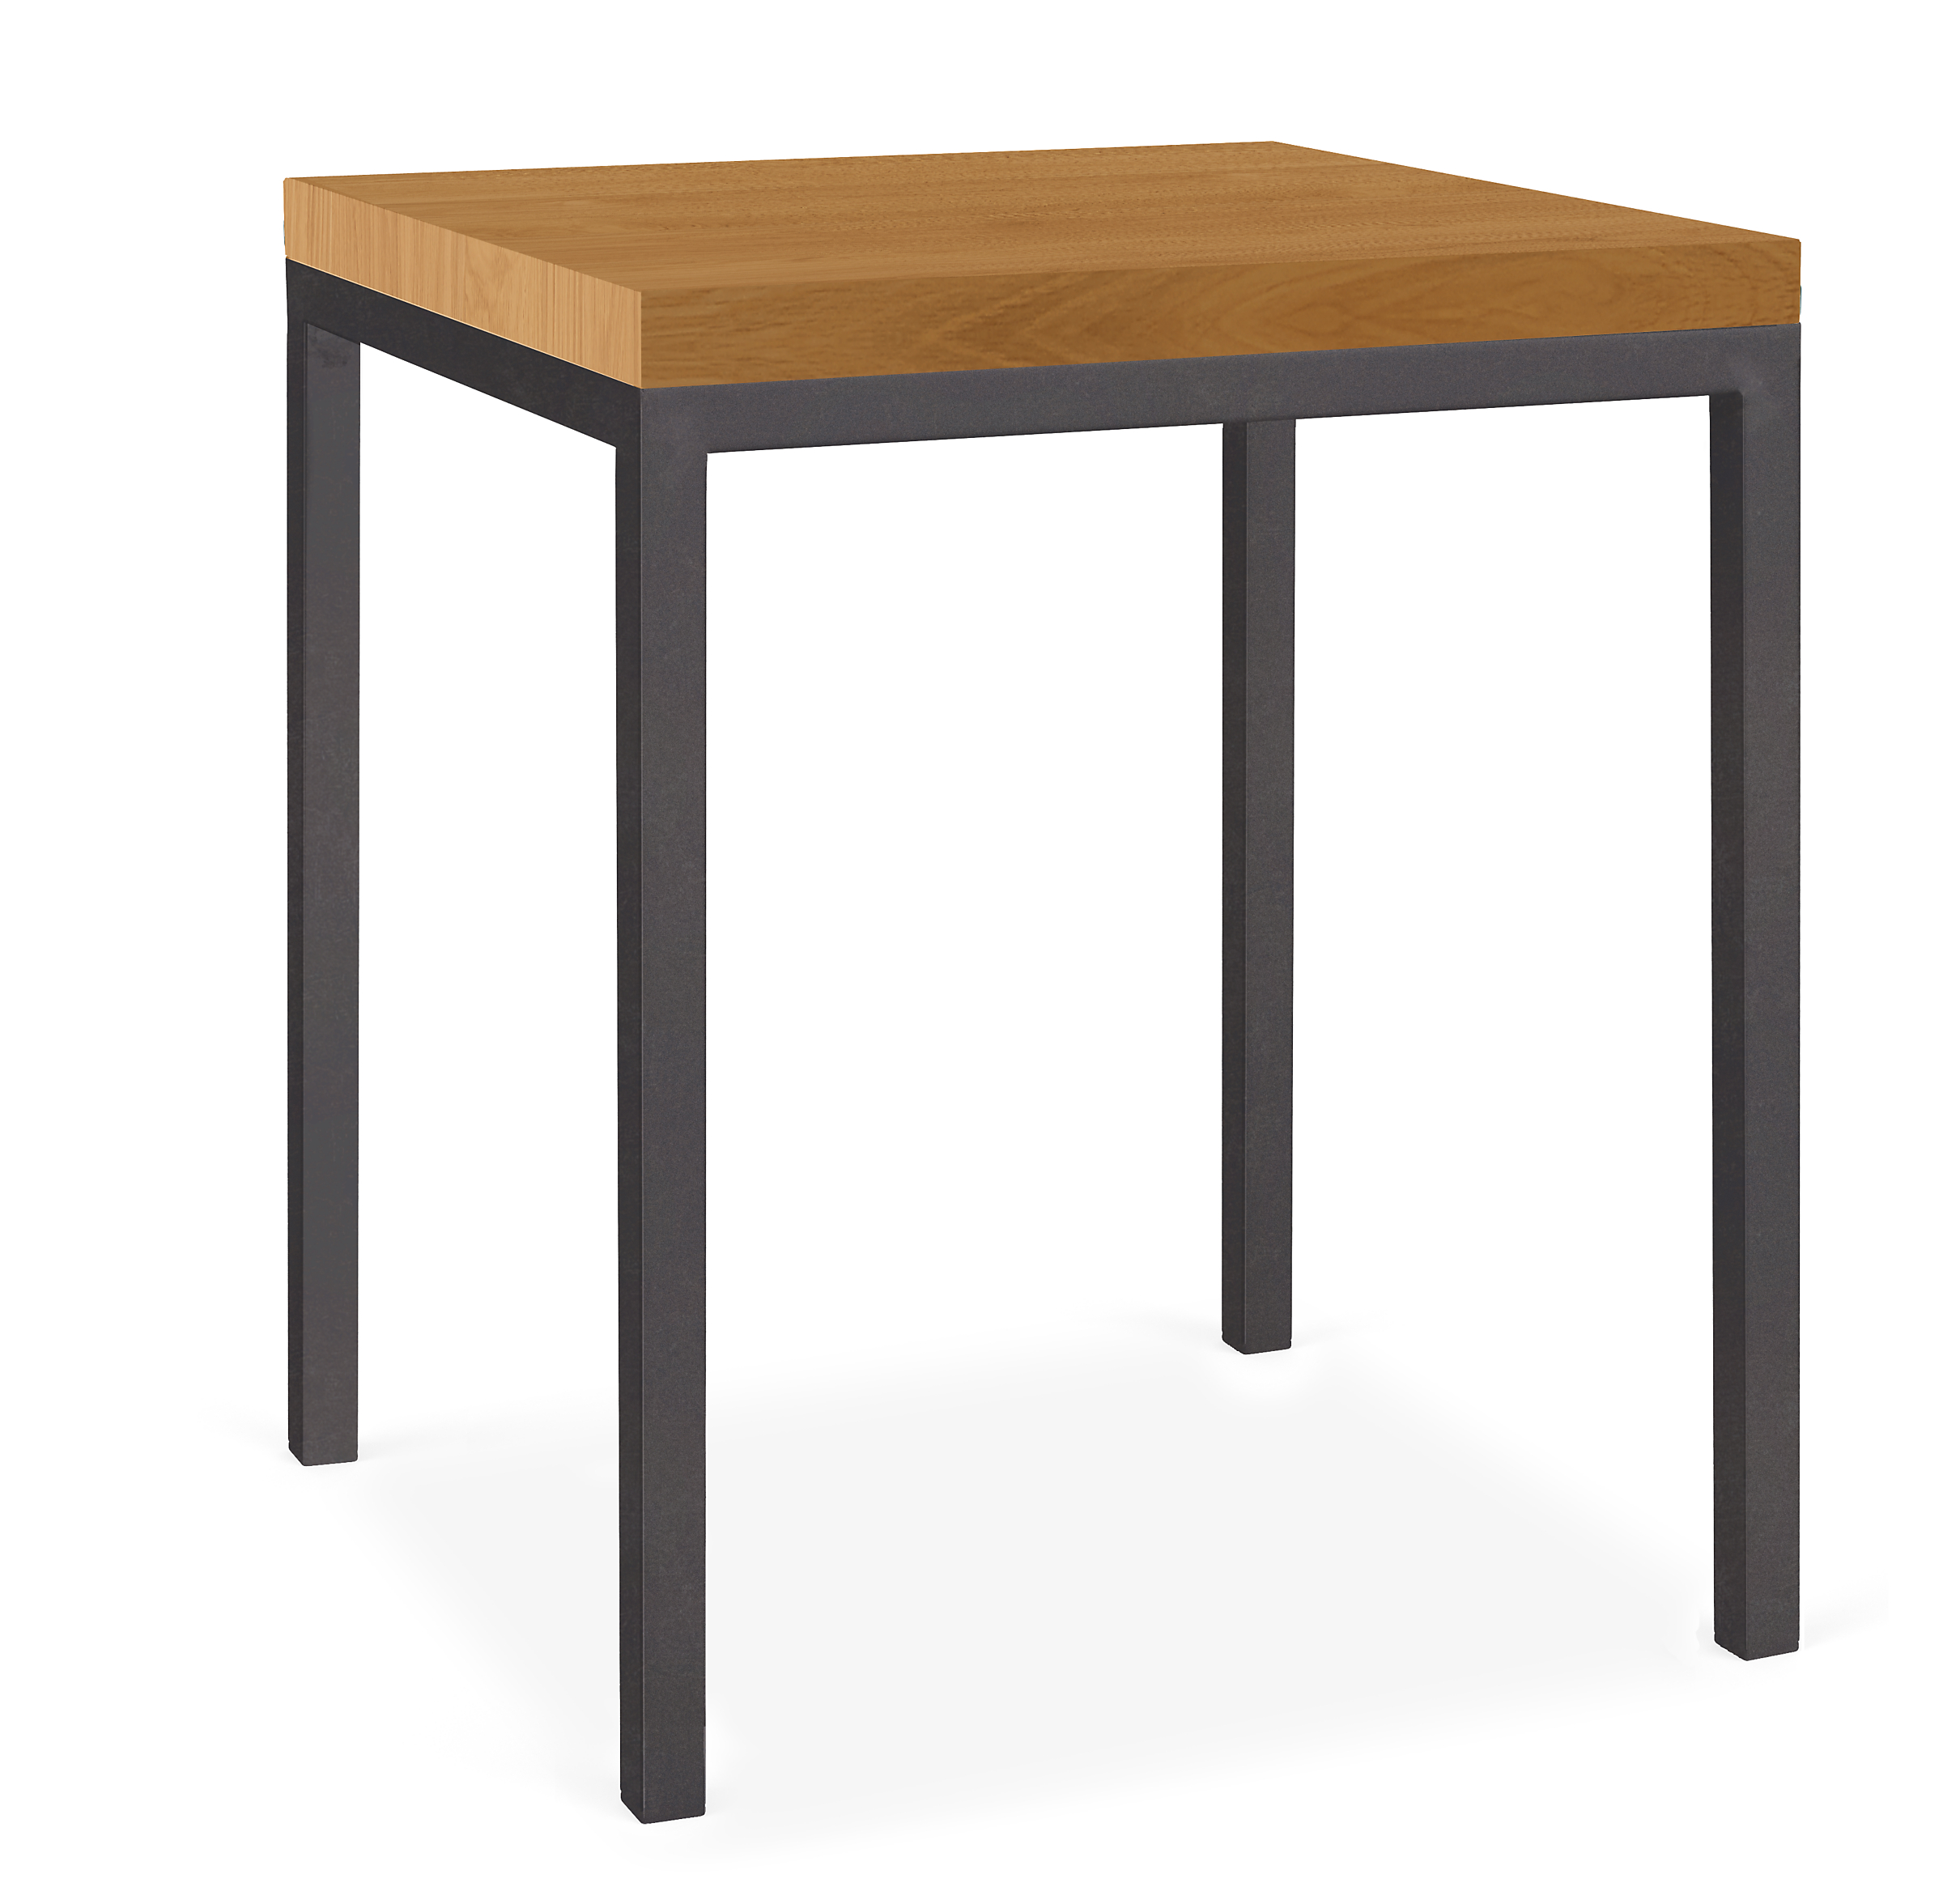 Parsons 18w 18d 22h End Table with 1" Leg